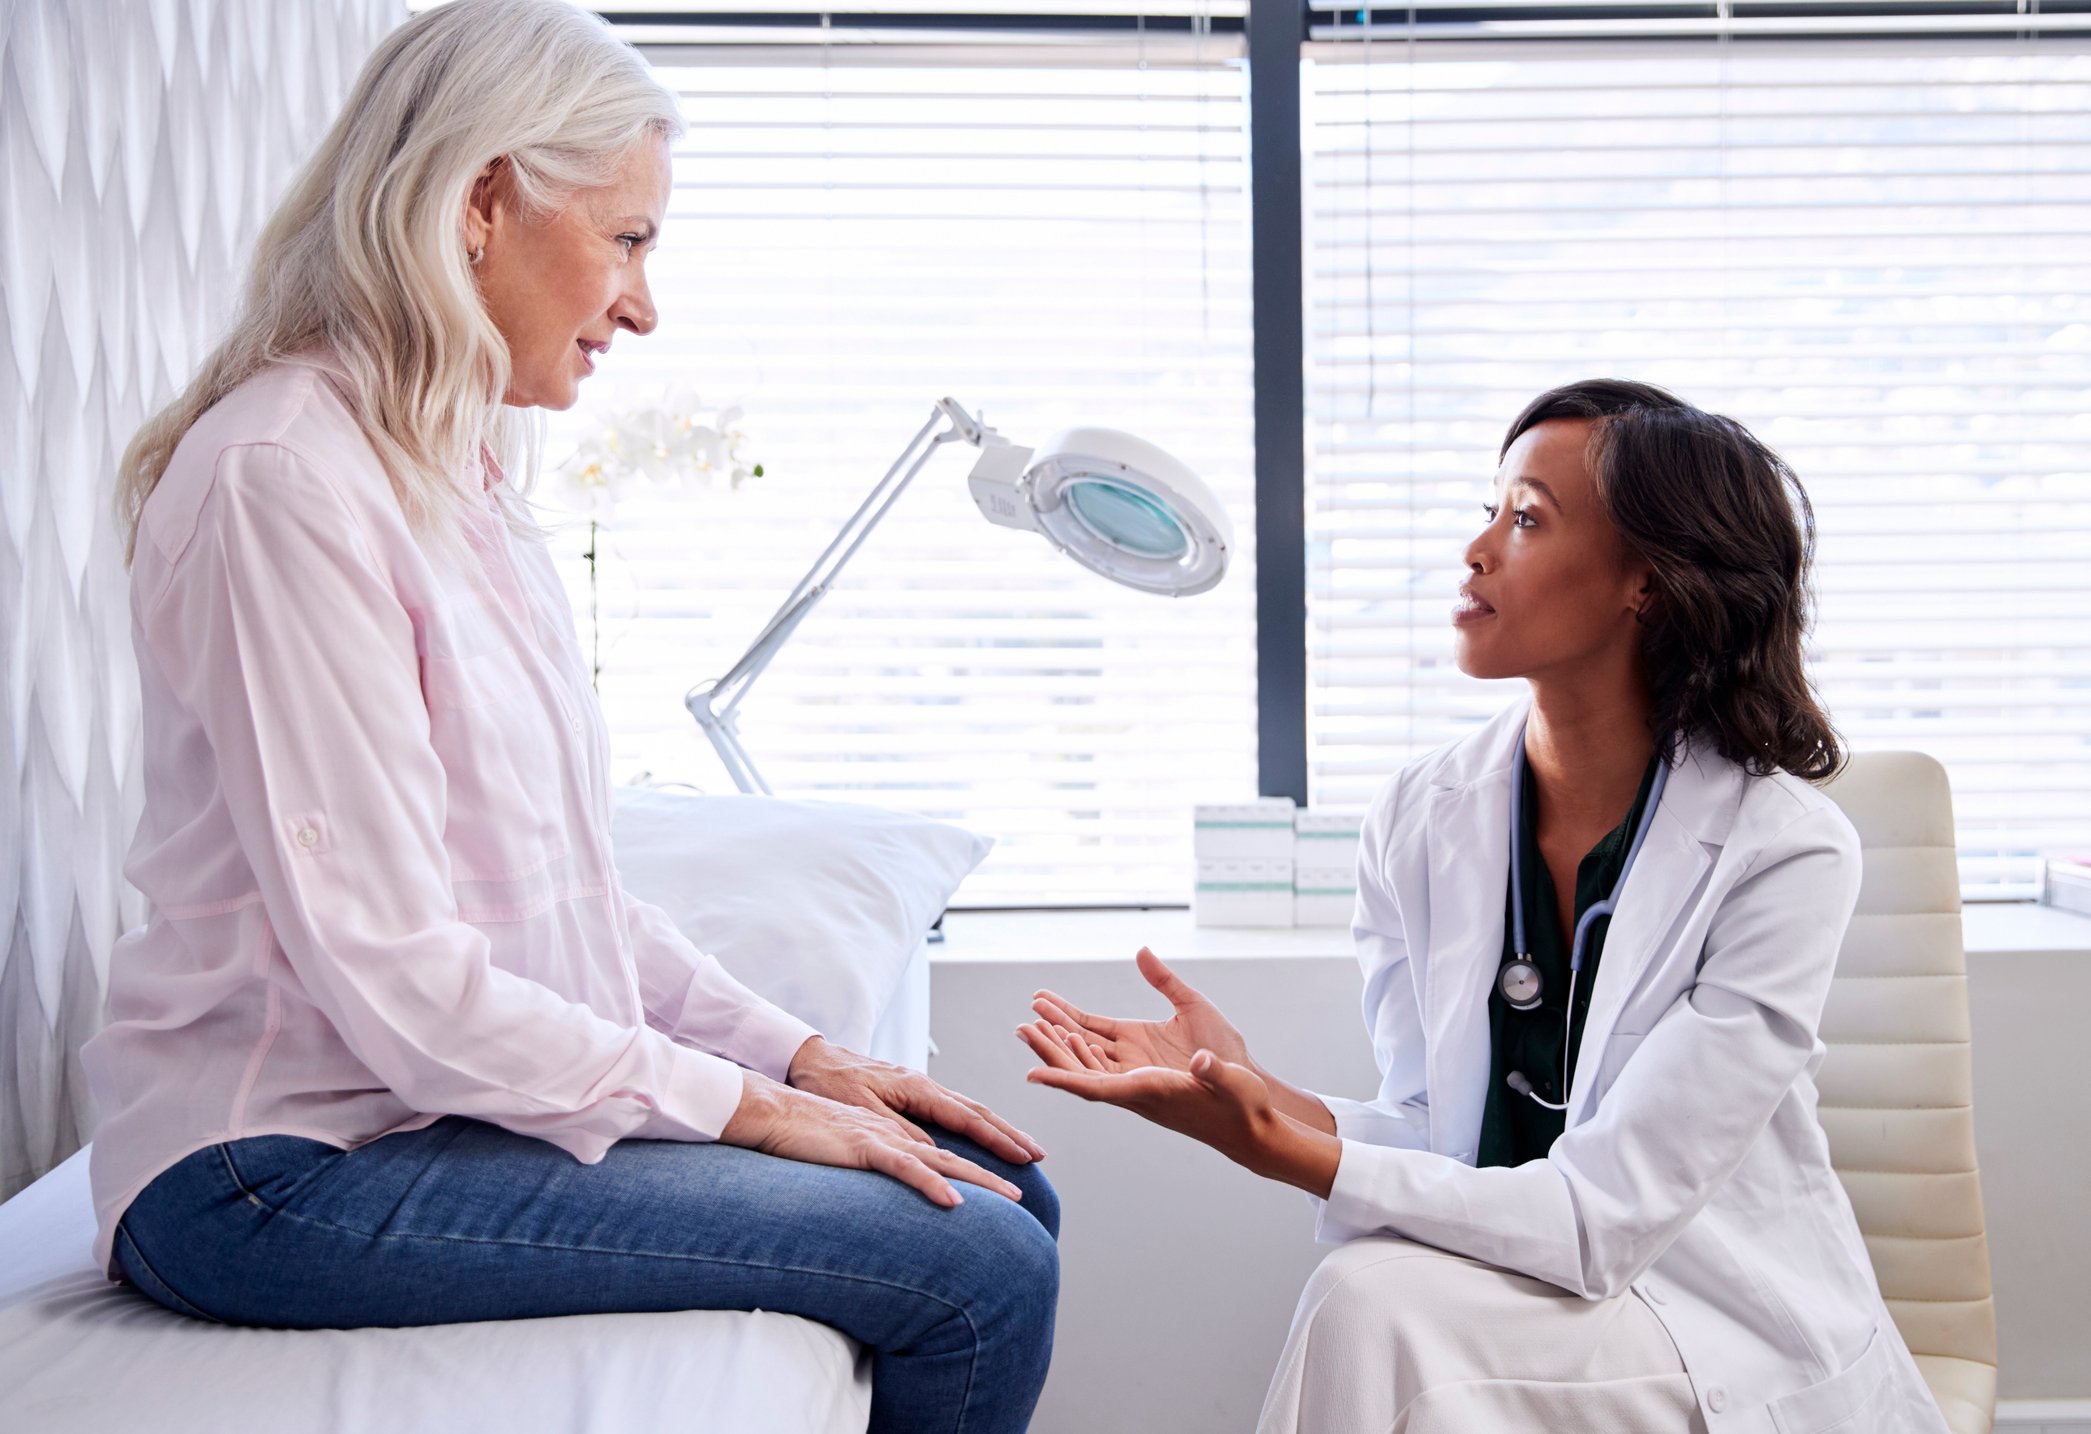 A female patient consults with a female physician